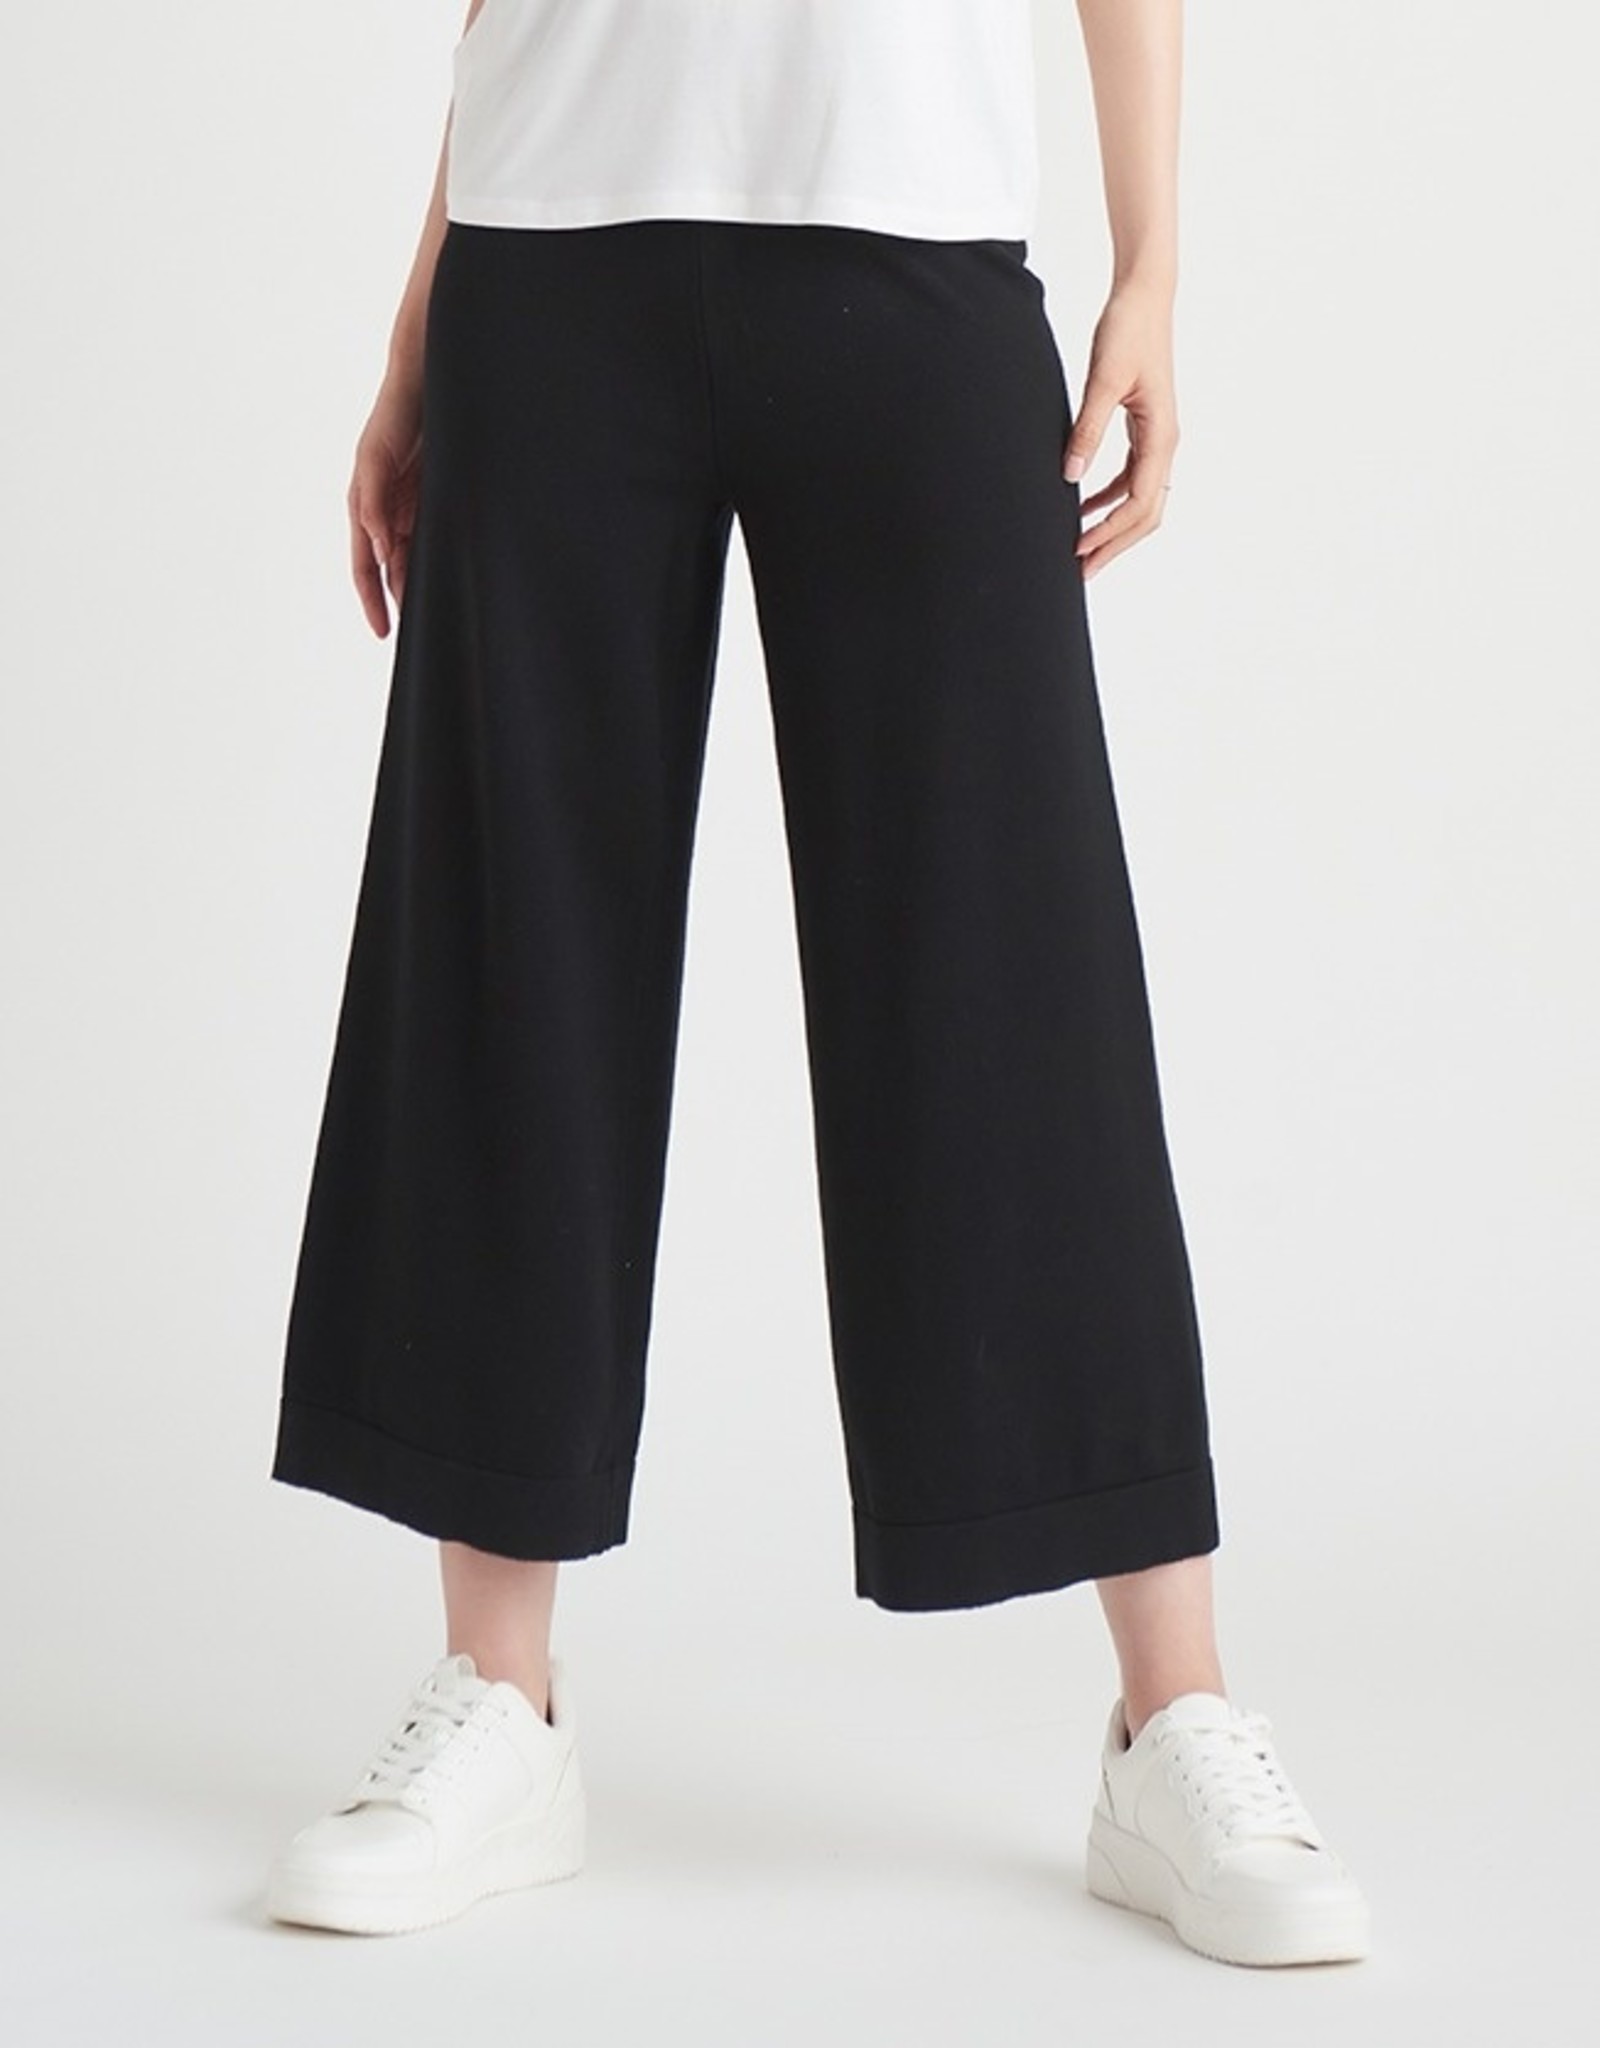 Pull-on Culotte Pant